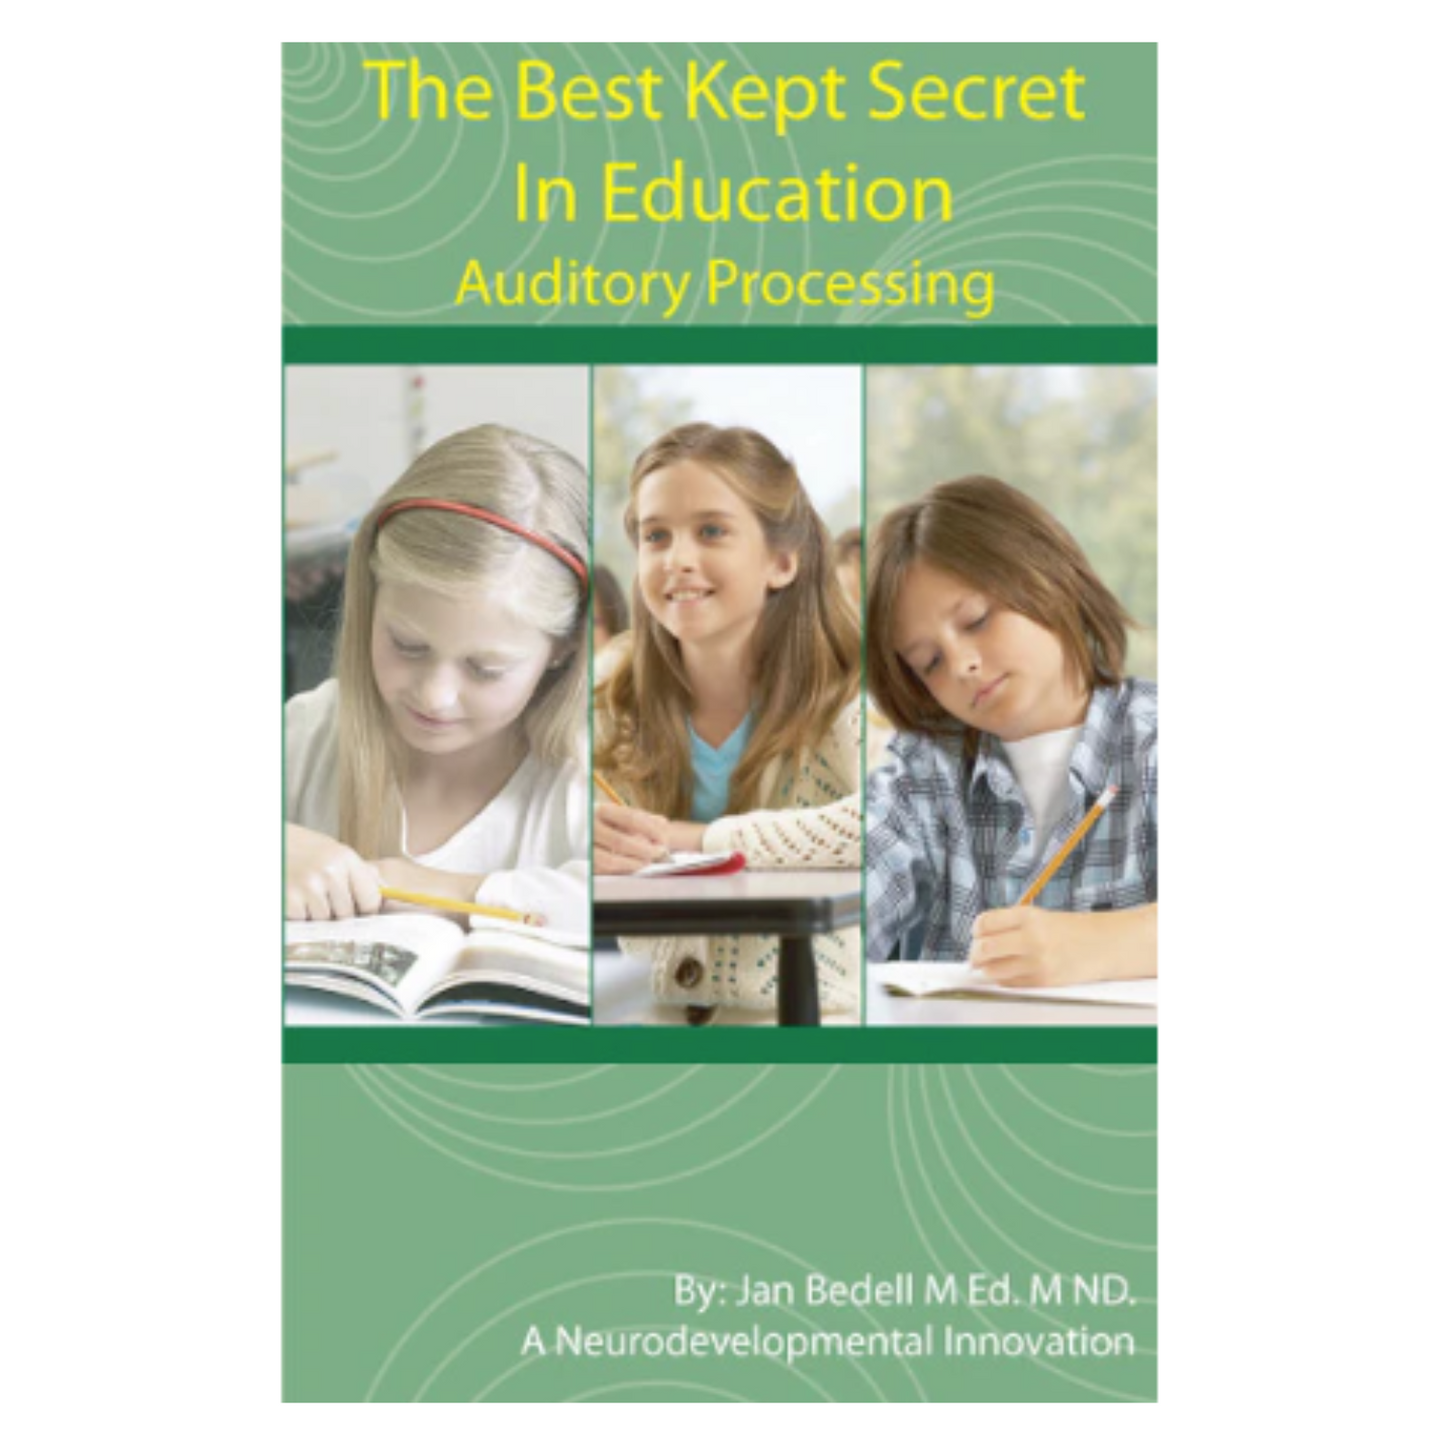 The Best Kept Secret in Education, Auditory Processing - Book